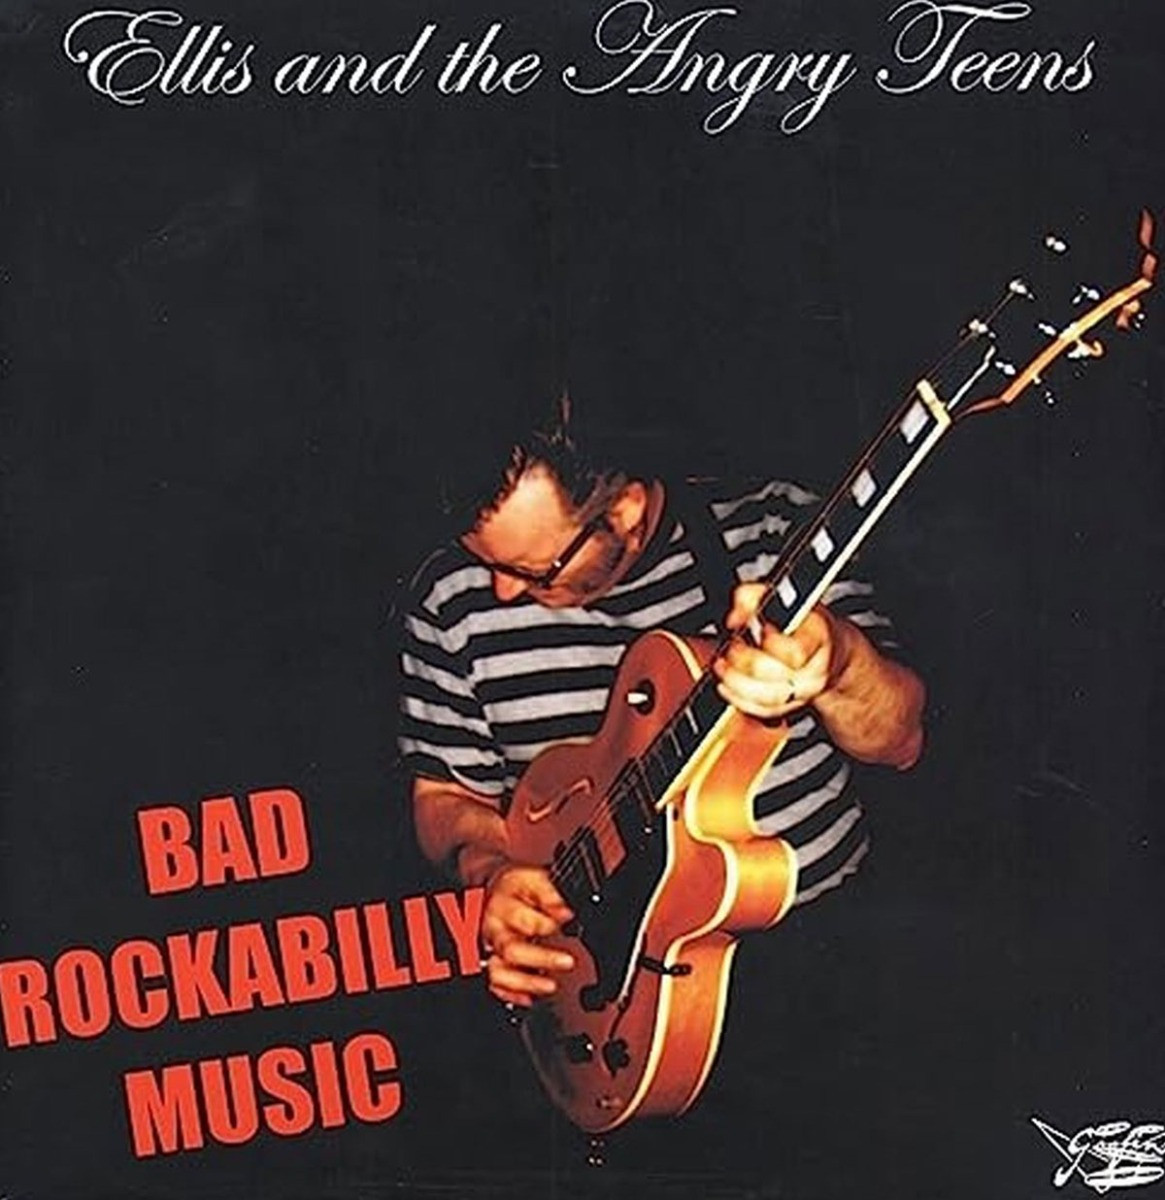 Ellis And The Angry Teens - Bad Rockabilly Music LP